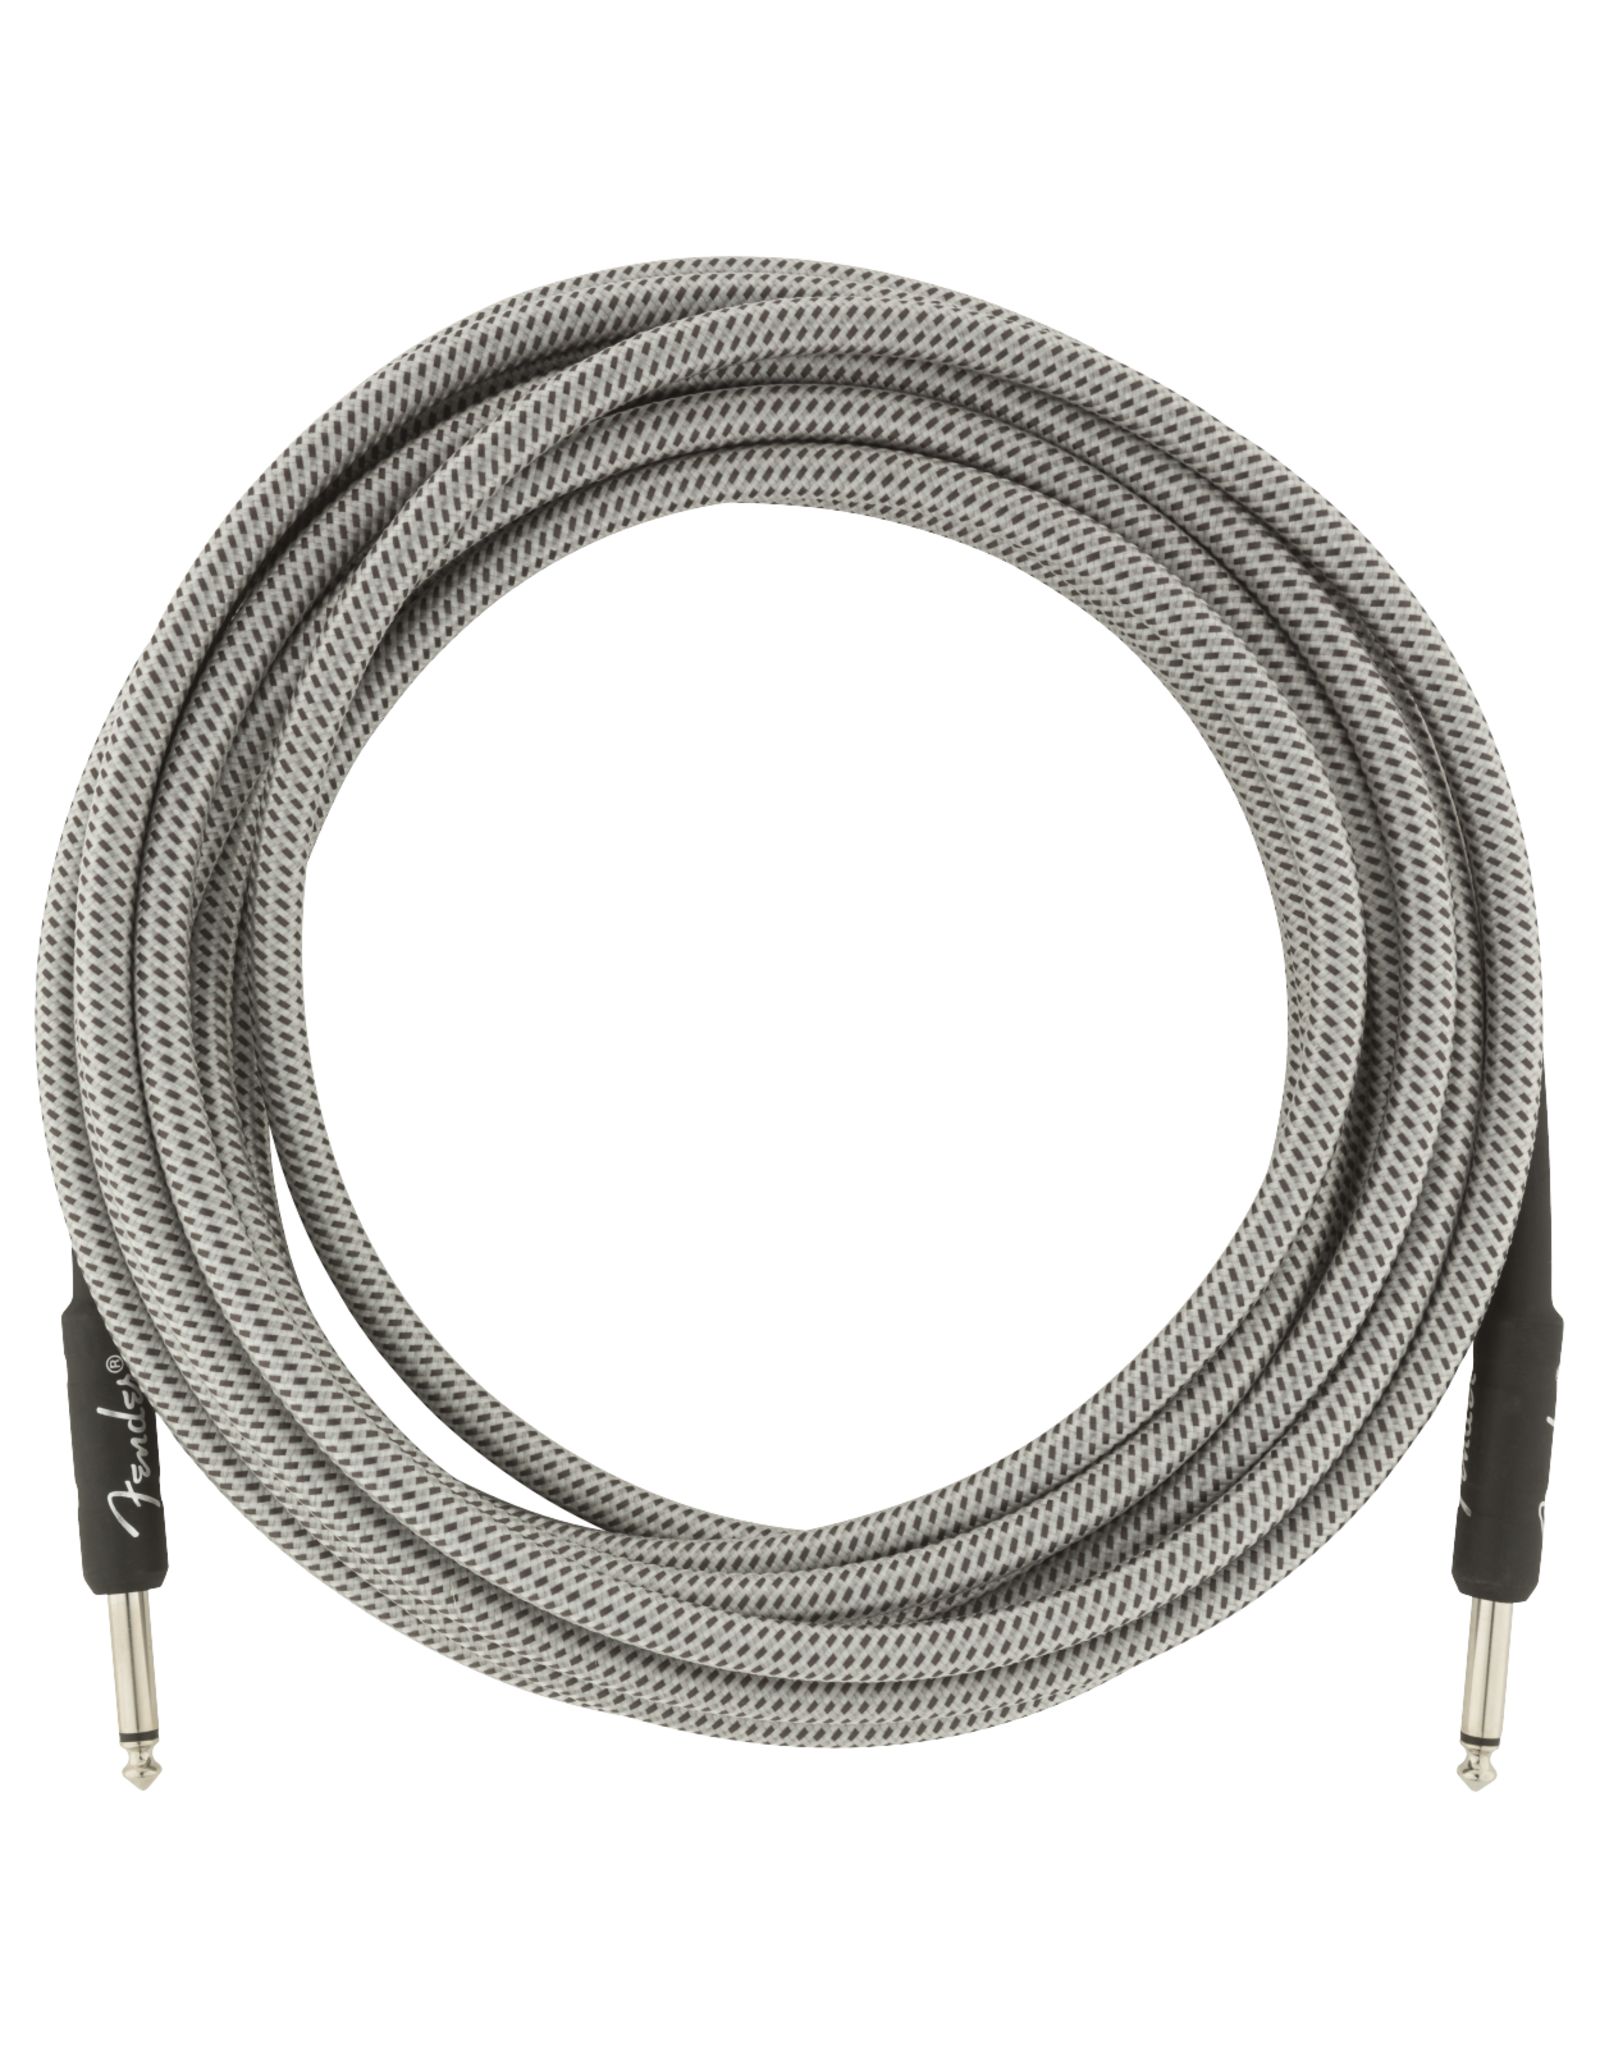 Fender Fender Professional Series Instrument Cable, 18.6', White Tweed